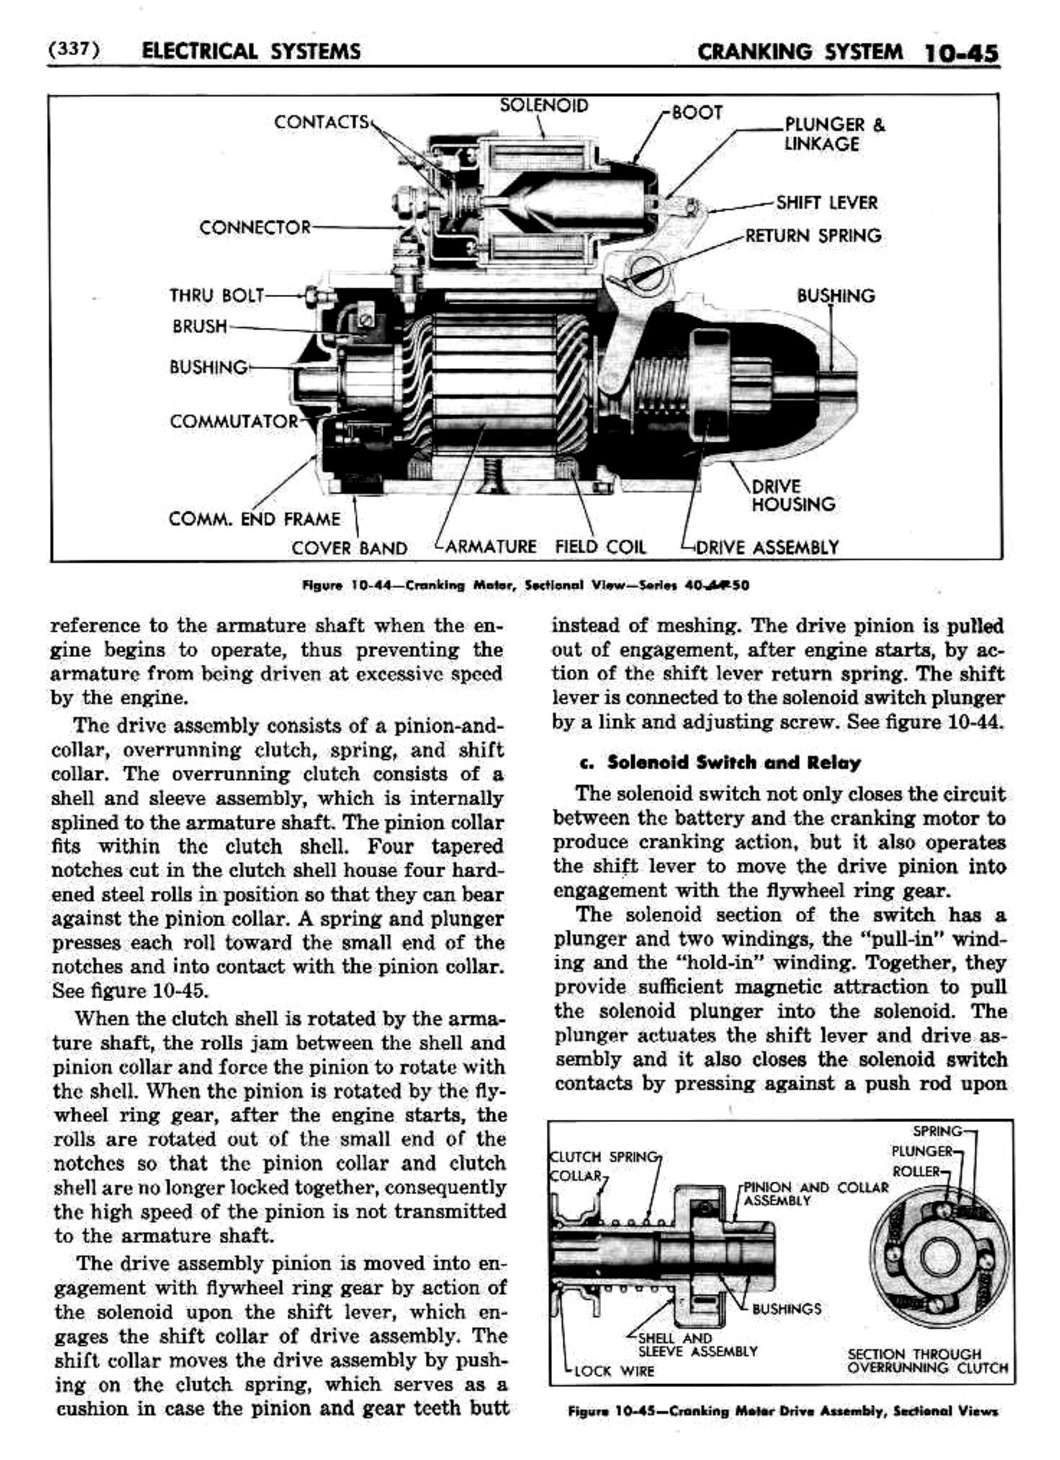 n_11 1951 Buick Shop Manual - Electrical Systems-045-045.jpg